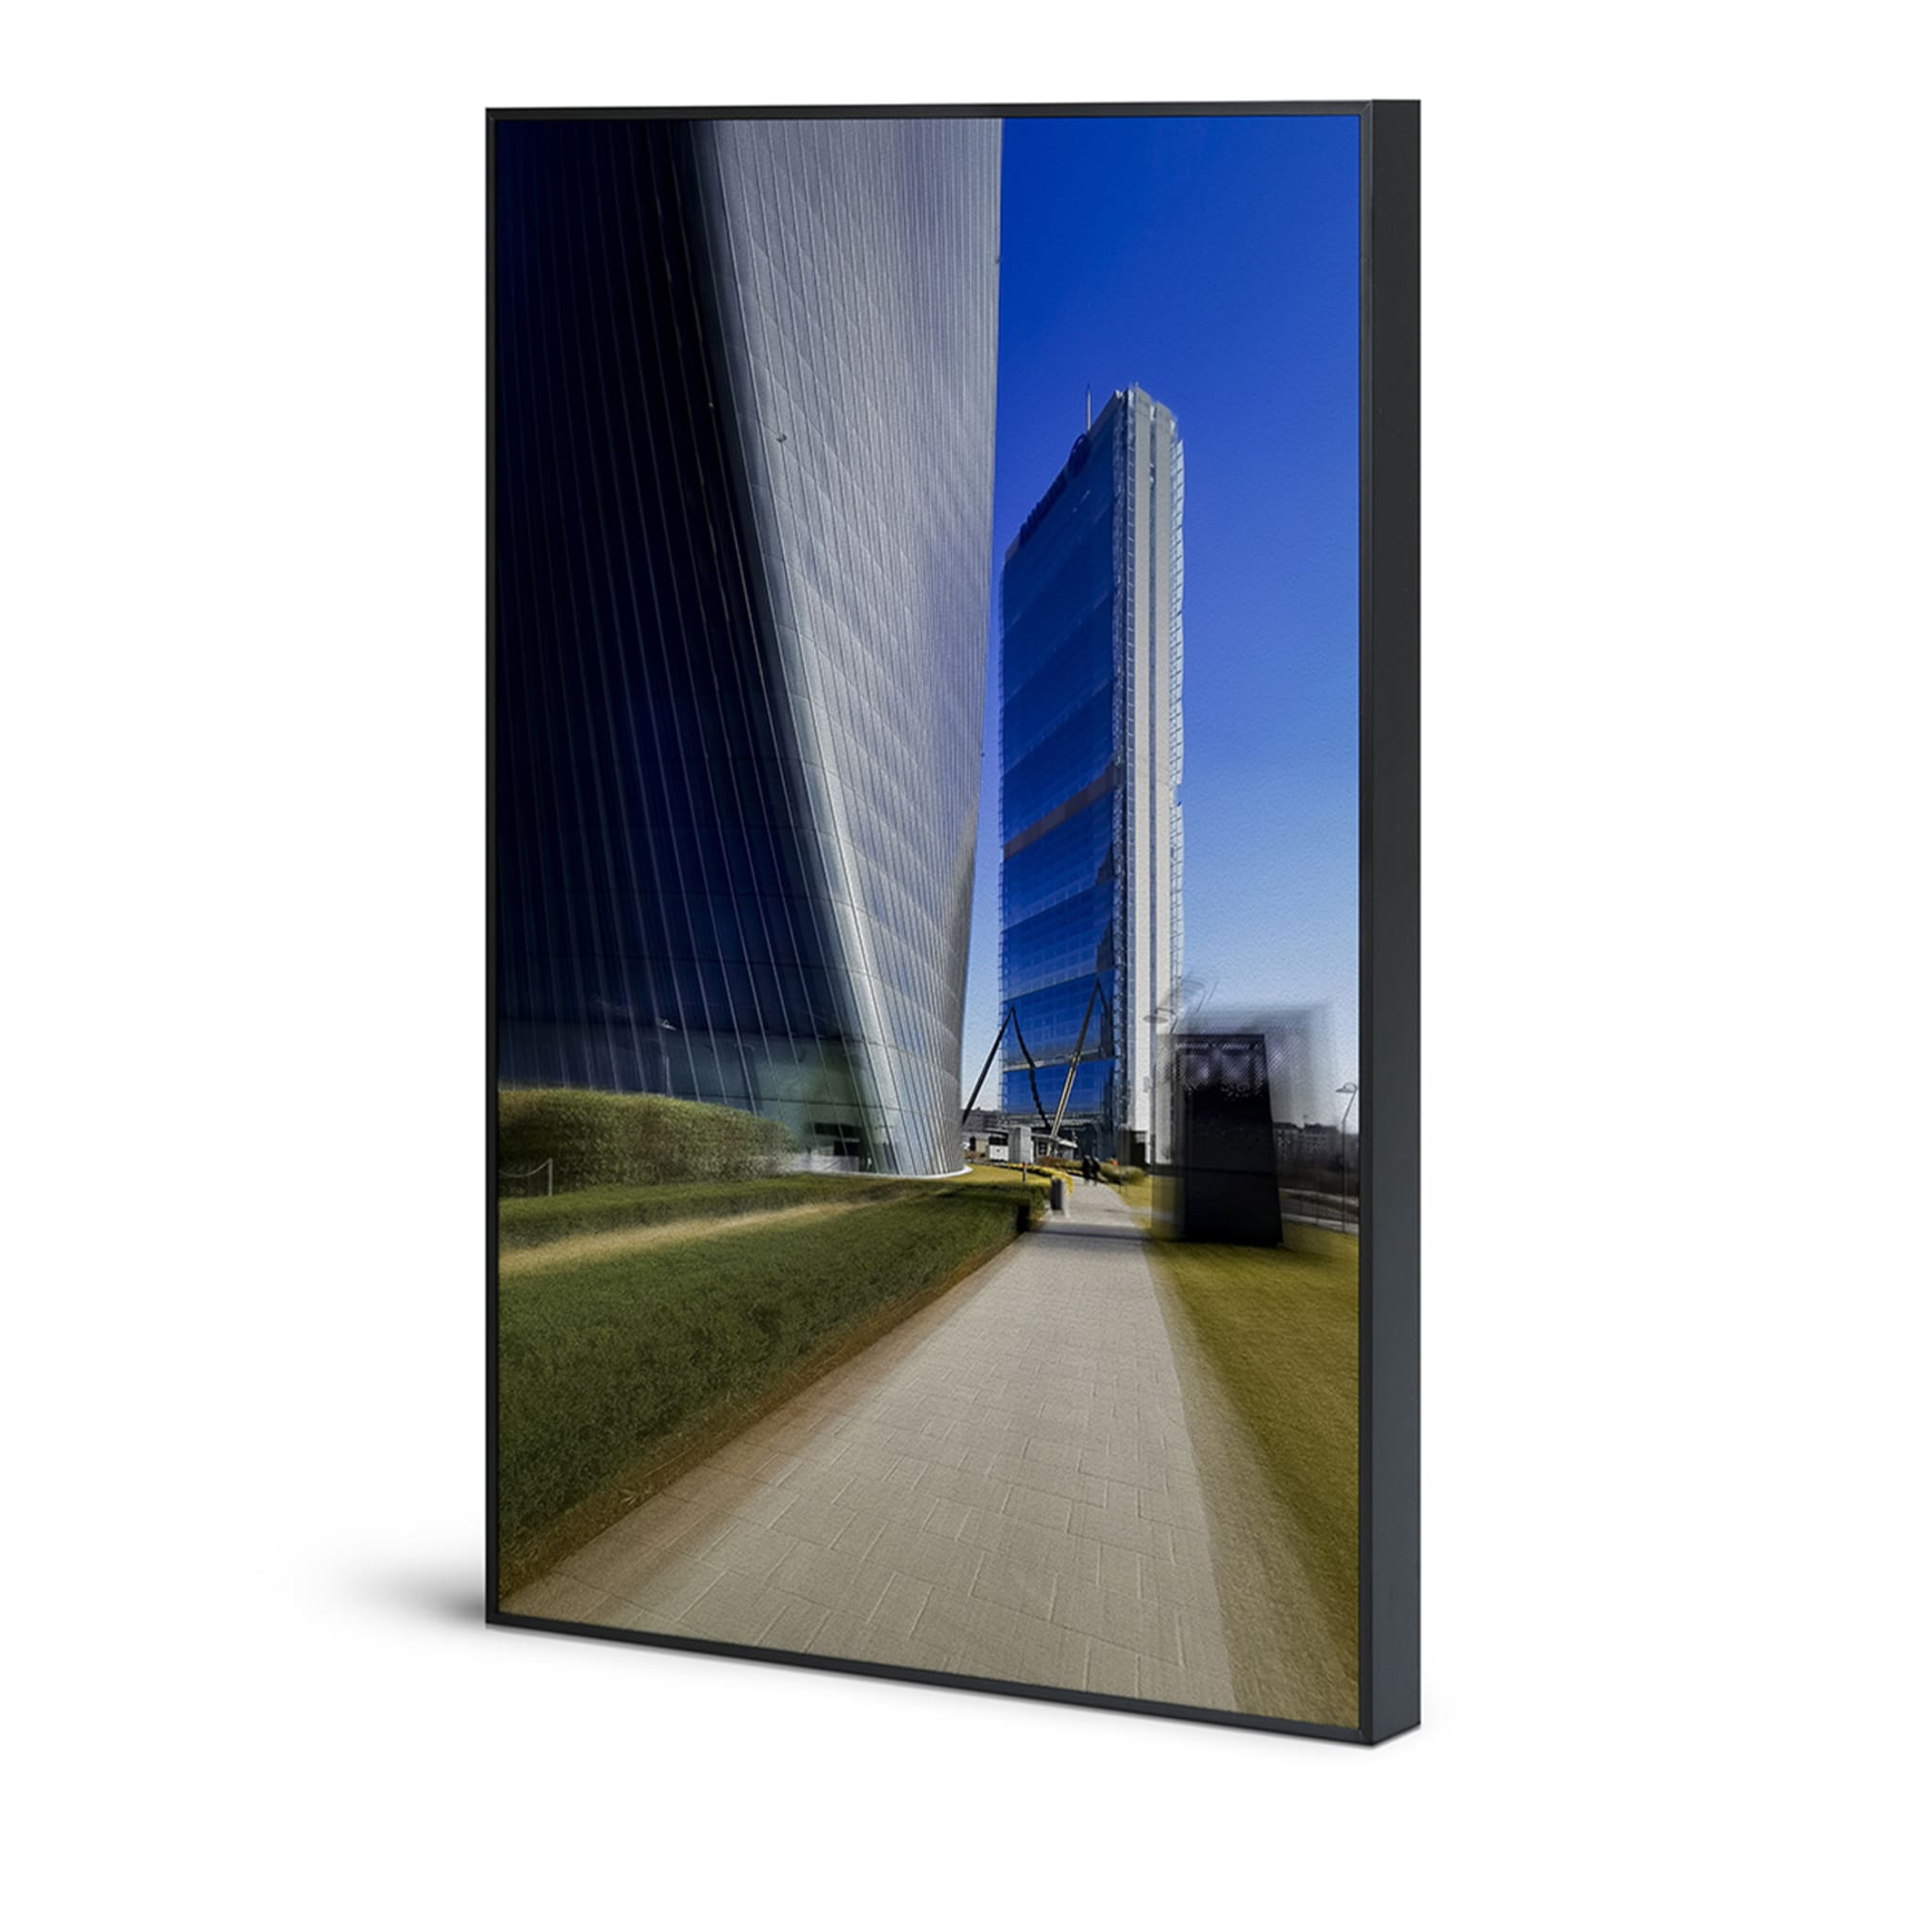 NCD-SLV09 Photographic Acousticframe® Panel by S. L. Vallauri - Alternative view 1